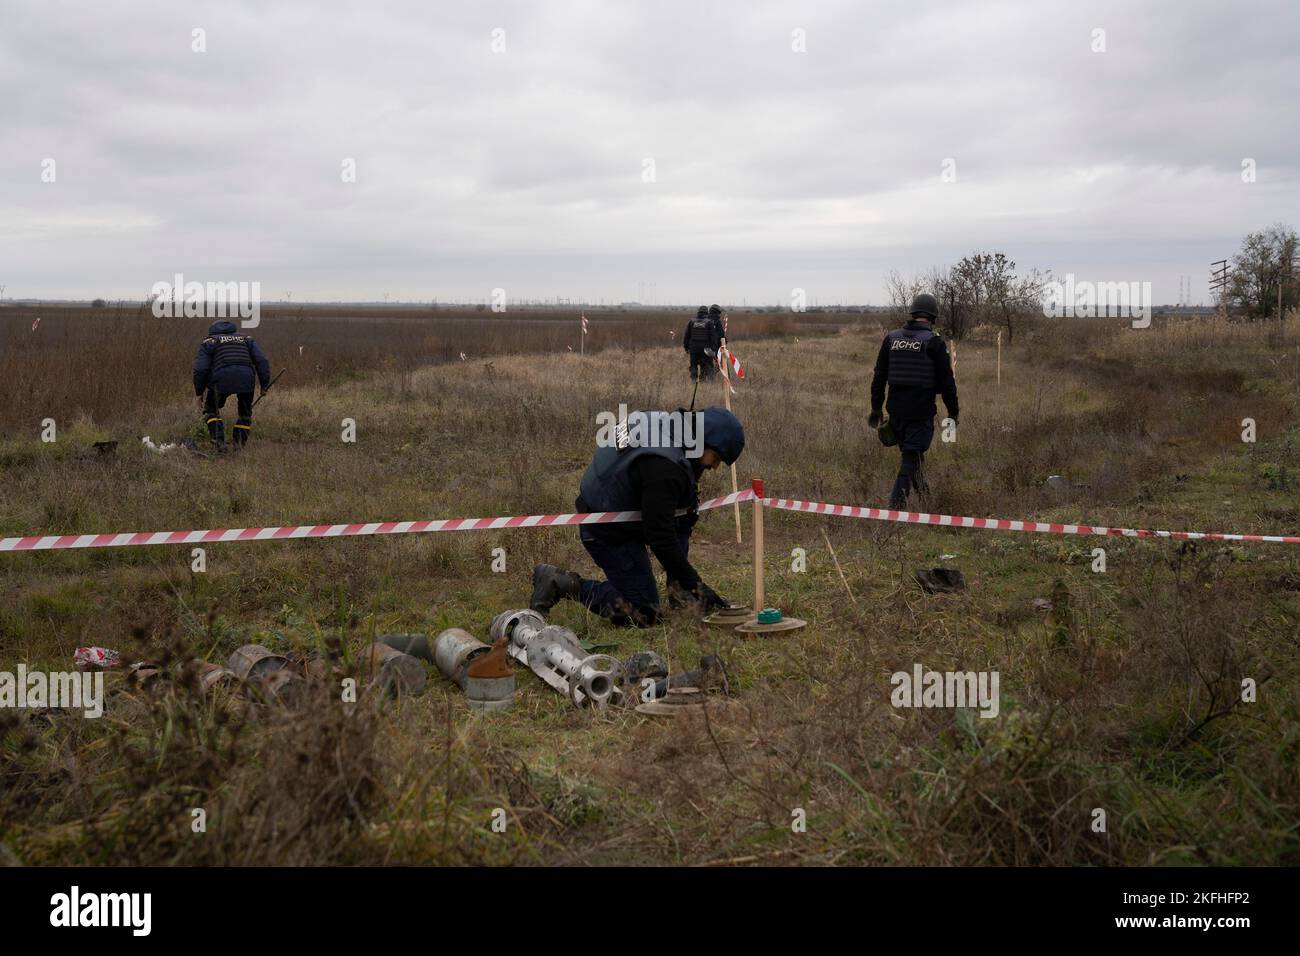 An investigator seen putting down an anti-tank mine during the process of demining. Since the liberation of Ukraine southern regional capital Kherson, the Ukrainian government has been working intensively on removing land mines in the liberated territory. Around 5000 explosives have been found and destroyed since the liberation. With the lack of sufficient robotics, the de-mining process is conducted manually and that would take at least several months to clean up the whole of Kherson city. Stock Photo